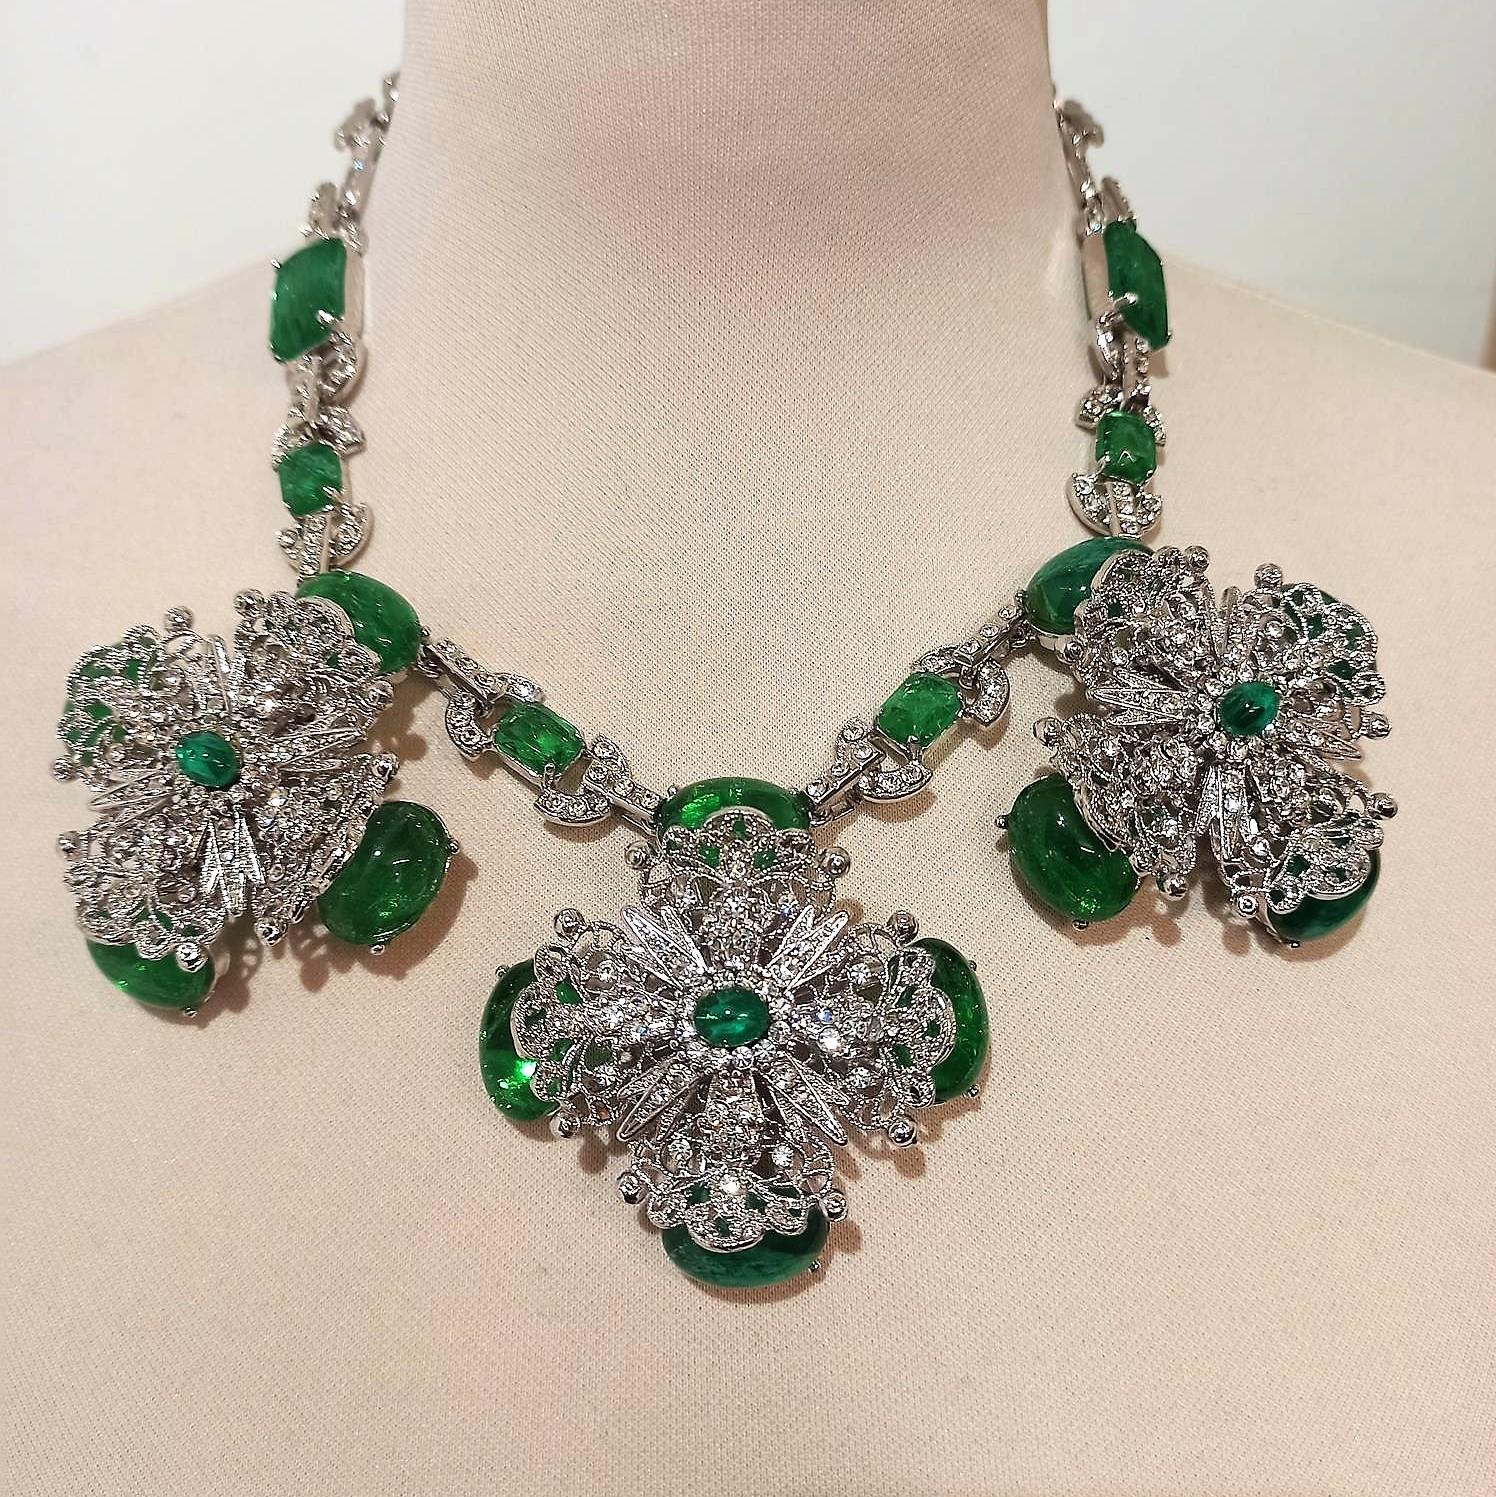 Fantastic piece by Carlo Zini
One of the world greatest bijoux designers
Non allergenic rhodium
Amazing hand application of swarovski crystals
Emerlad like crystals
100% Artisanal work
Made in Milano
Worldwide express shipping included in the price !